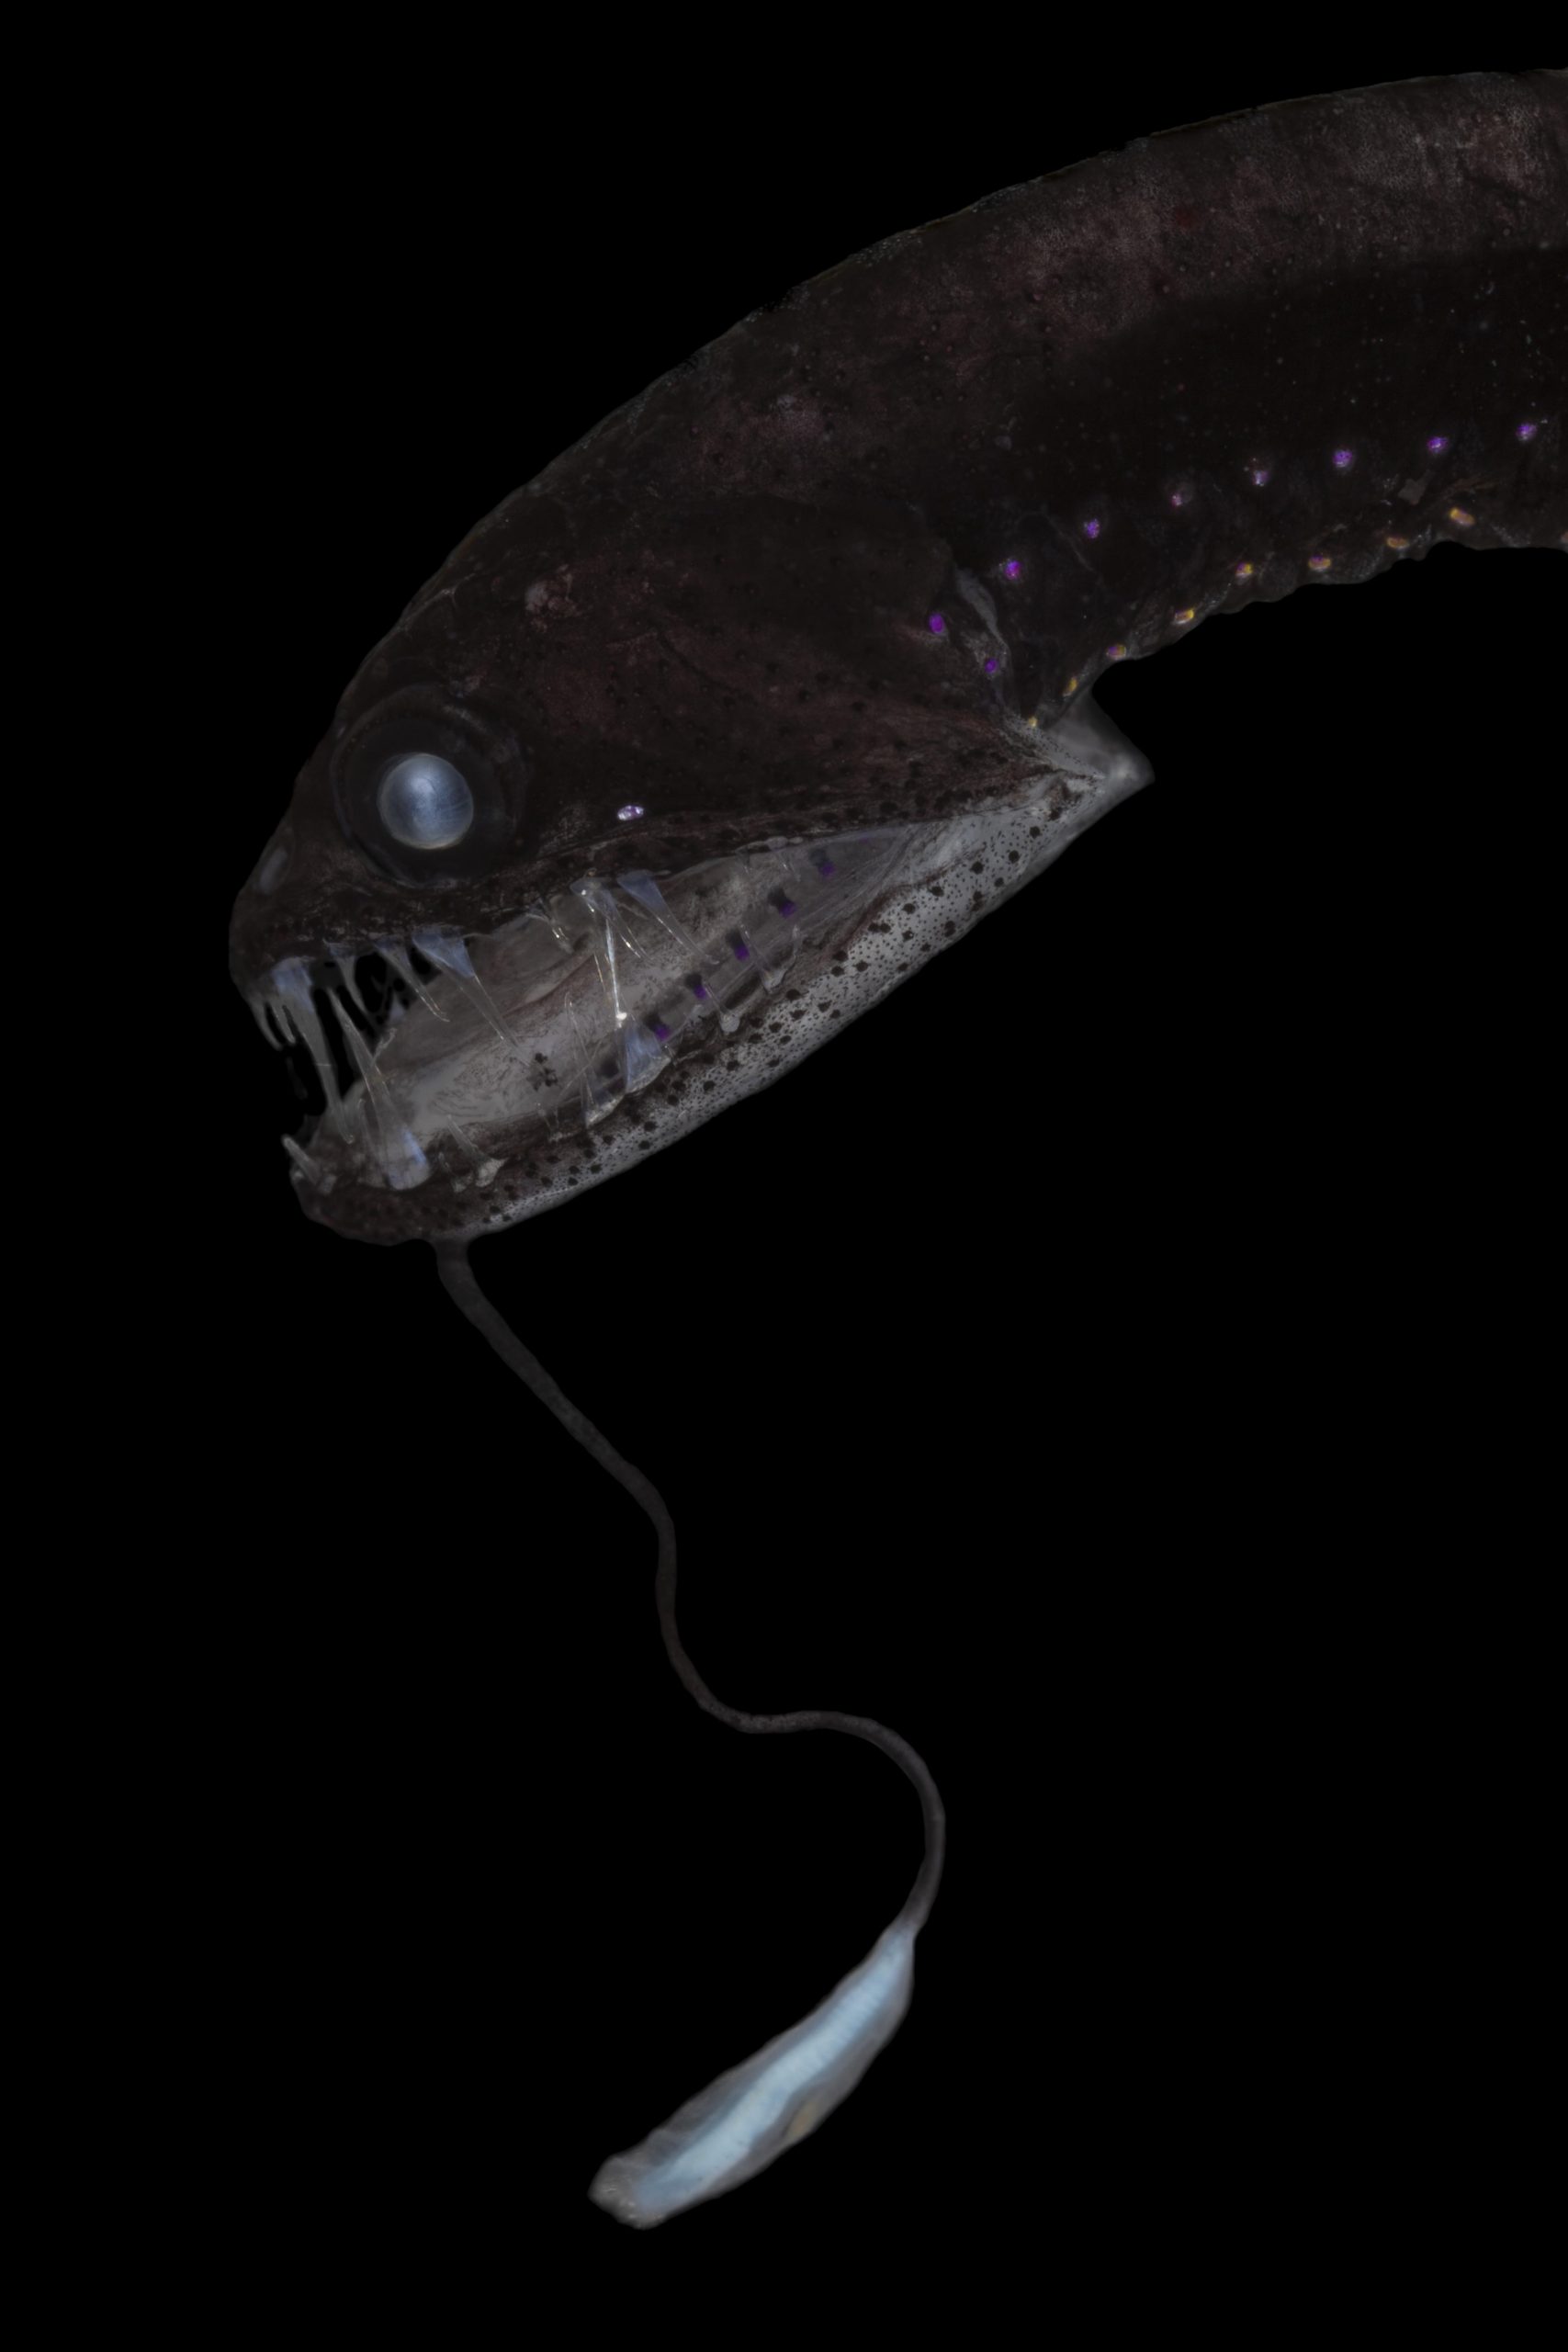 At only a few inches in length, the black dragonfish (Idiacanthidae) is still a ferocious predator in the Ocean Twilight Zone, using its dangling lure and ensnaring teeth to trap prey looming in the dimly lit water. (Photo by Paul Caiger, © Woods Hole Oceanographic Institution).